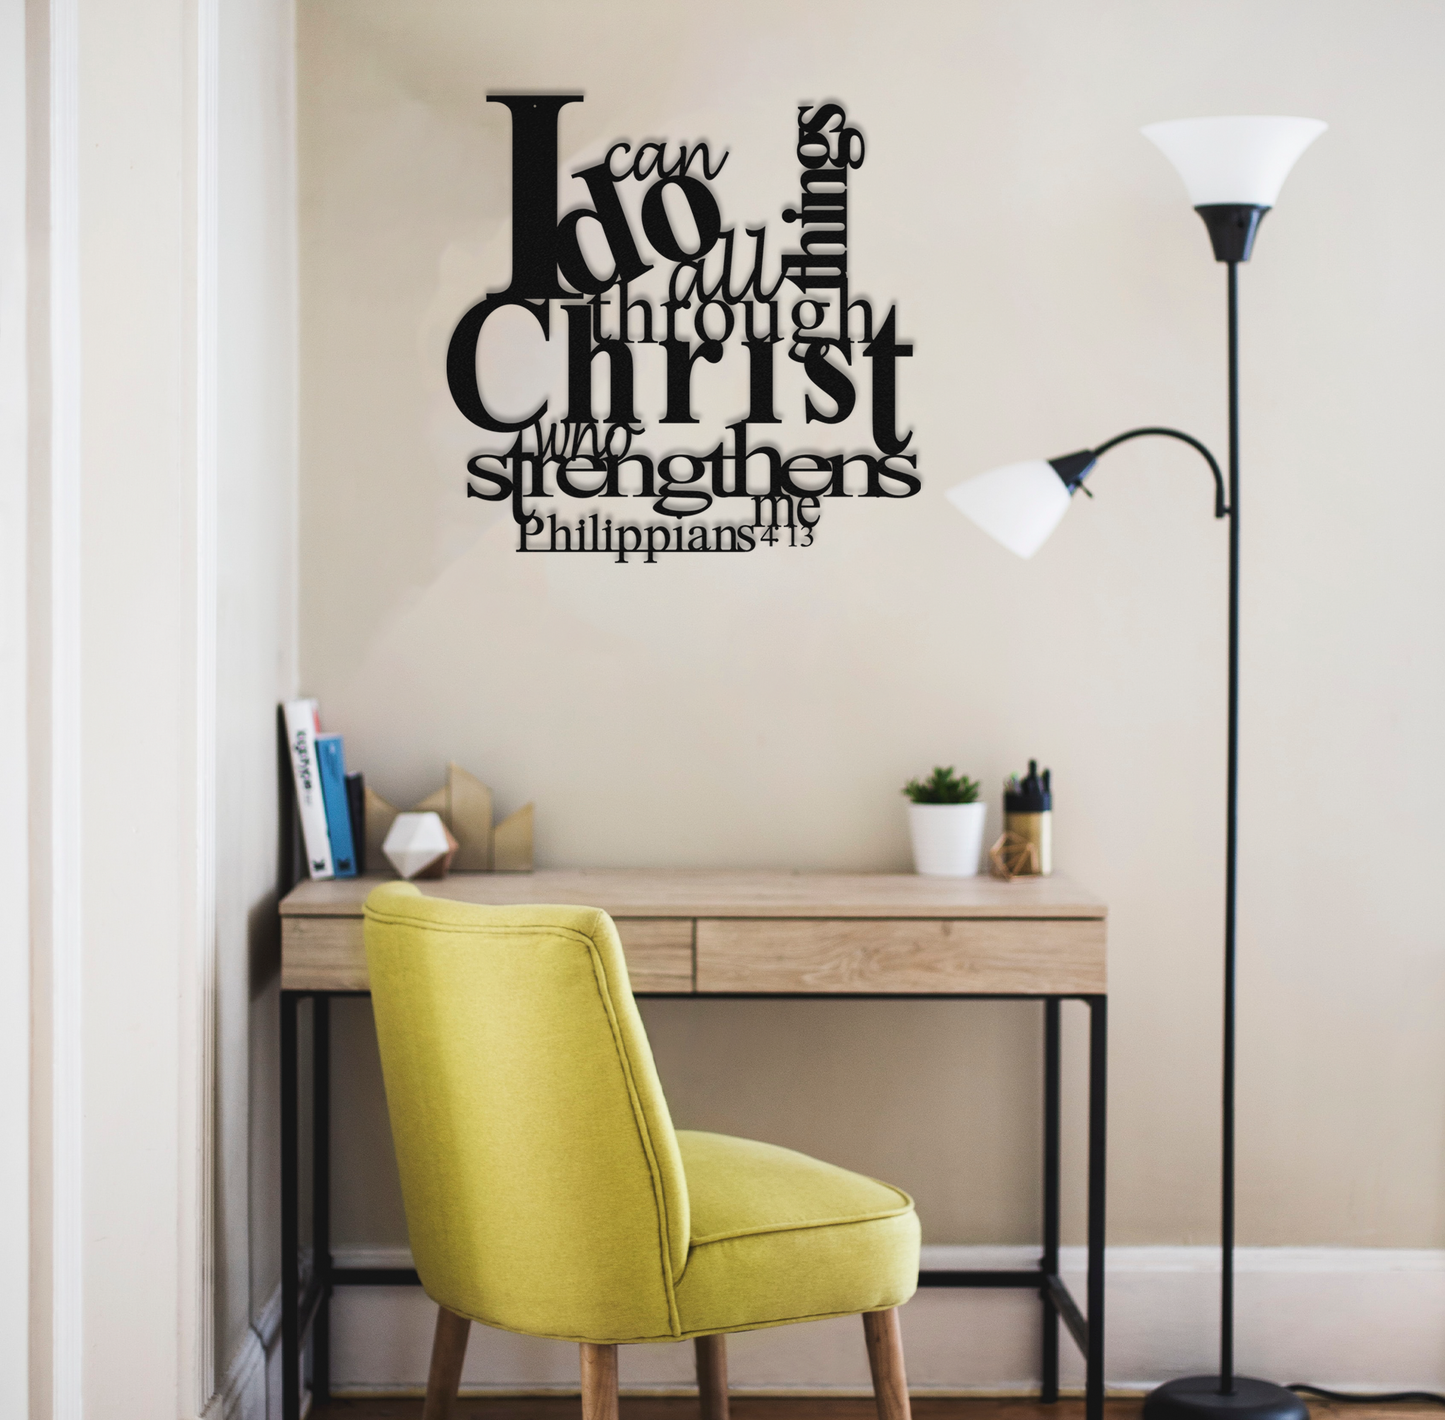 Philippians 4 13 Metal Wall Decor With Desk Badger Steel USA Next to the couch